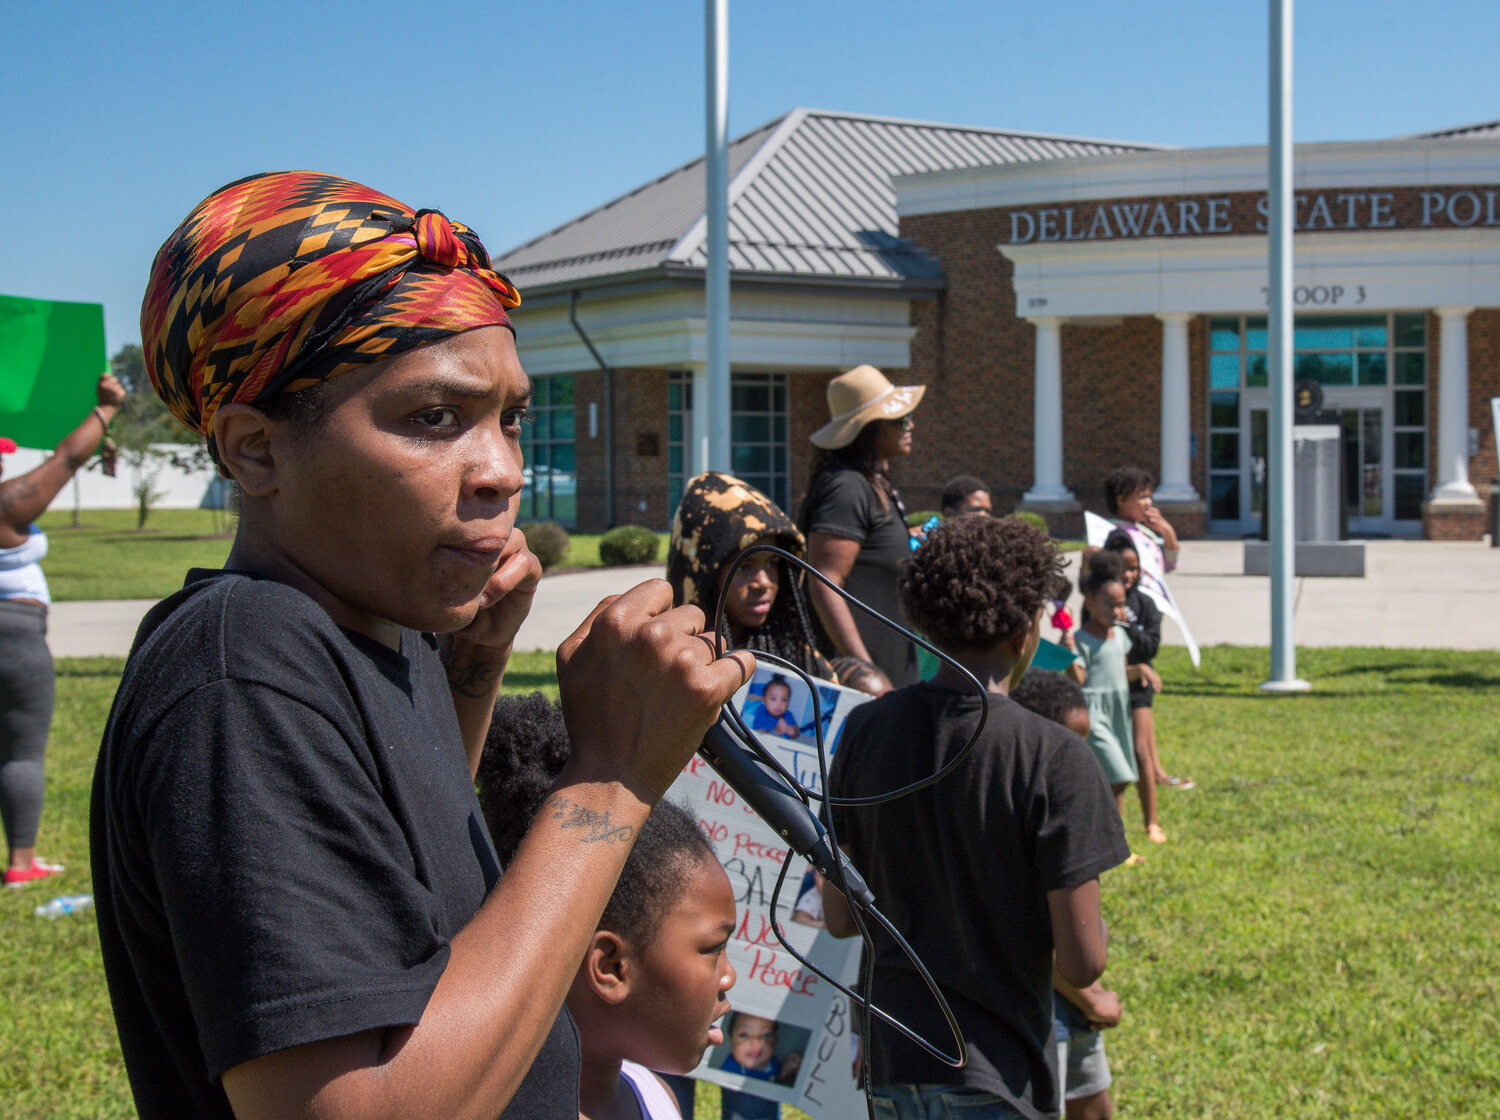 Nautica Saunders, an aunt of Kasai, protests with friends and family outside Delaware State Police Troop 3 in Camden on Wednesday. The demontrators said they were there for justice due to what they claim was driver negligence. Family and friends are calling for an arrest; Delaware State Police say they are continuing to investigate the incident.